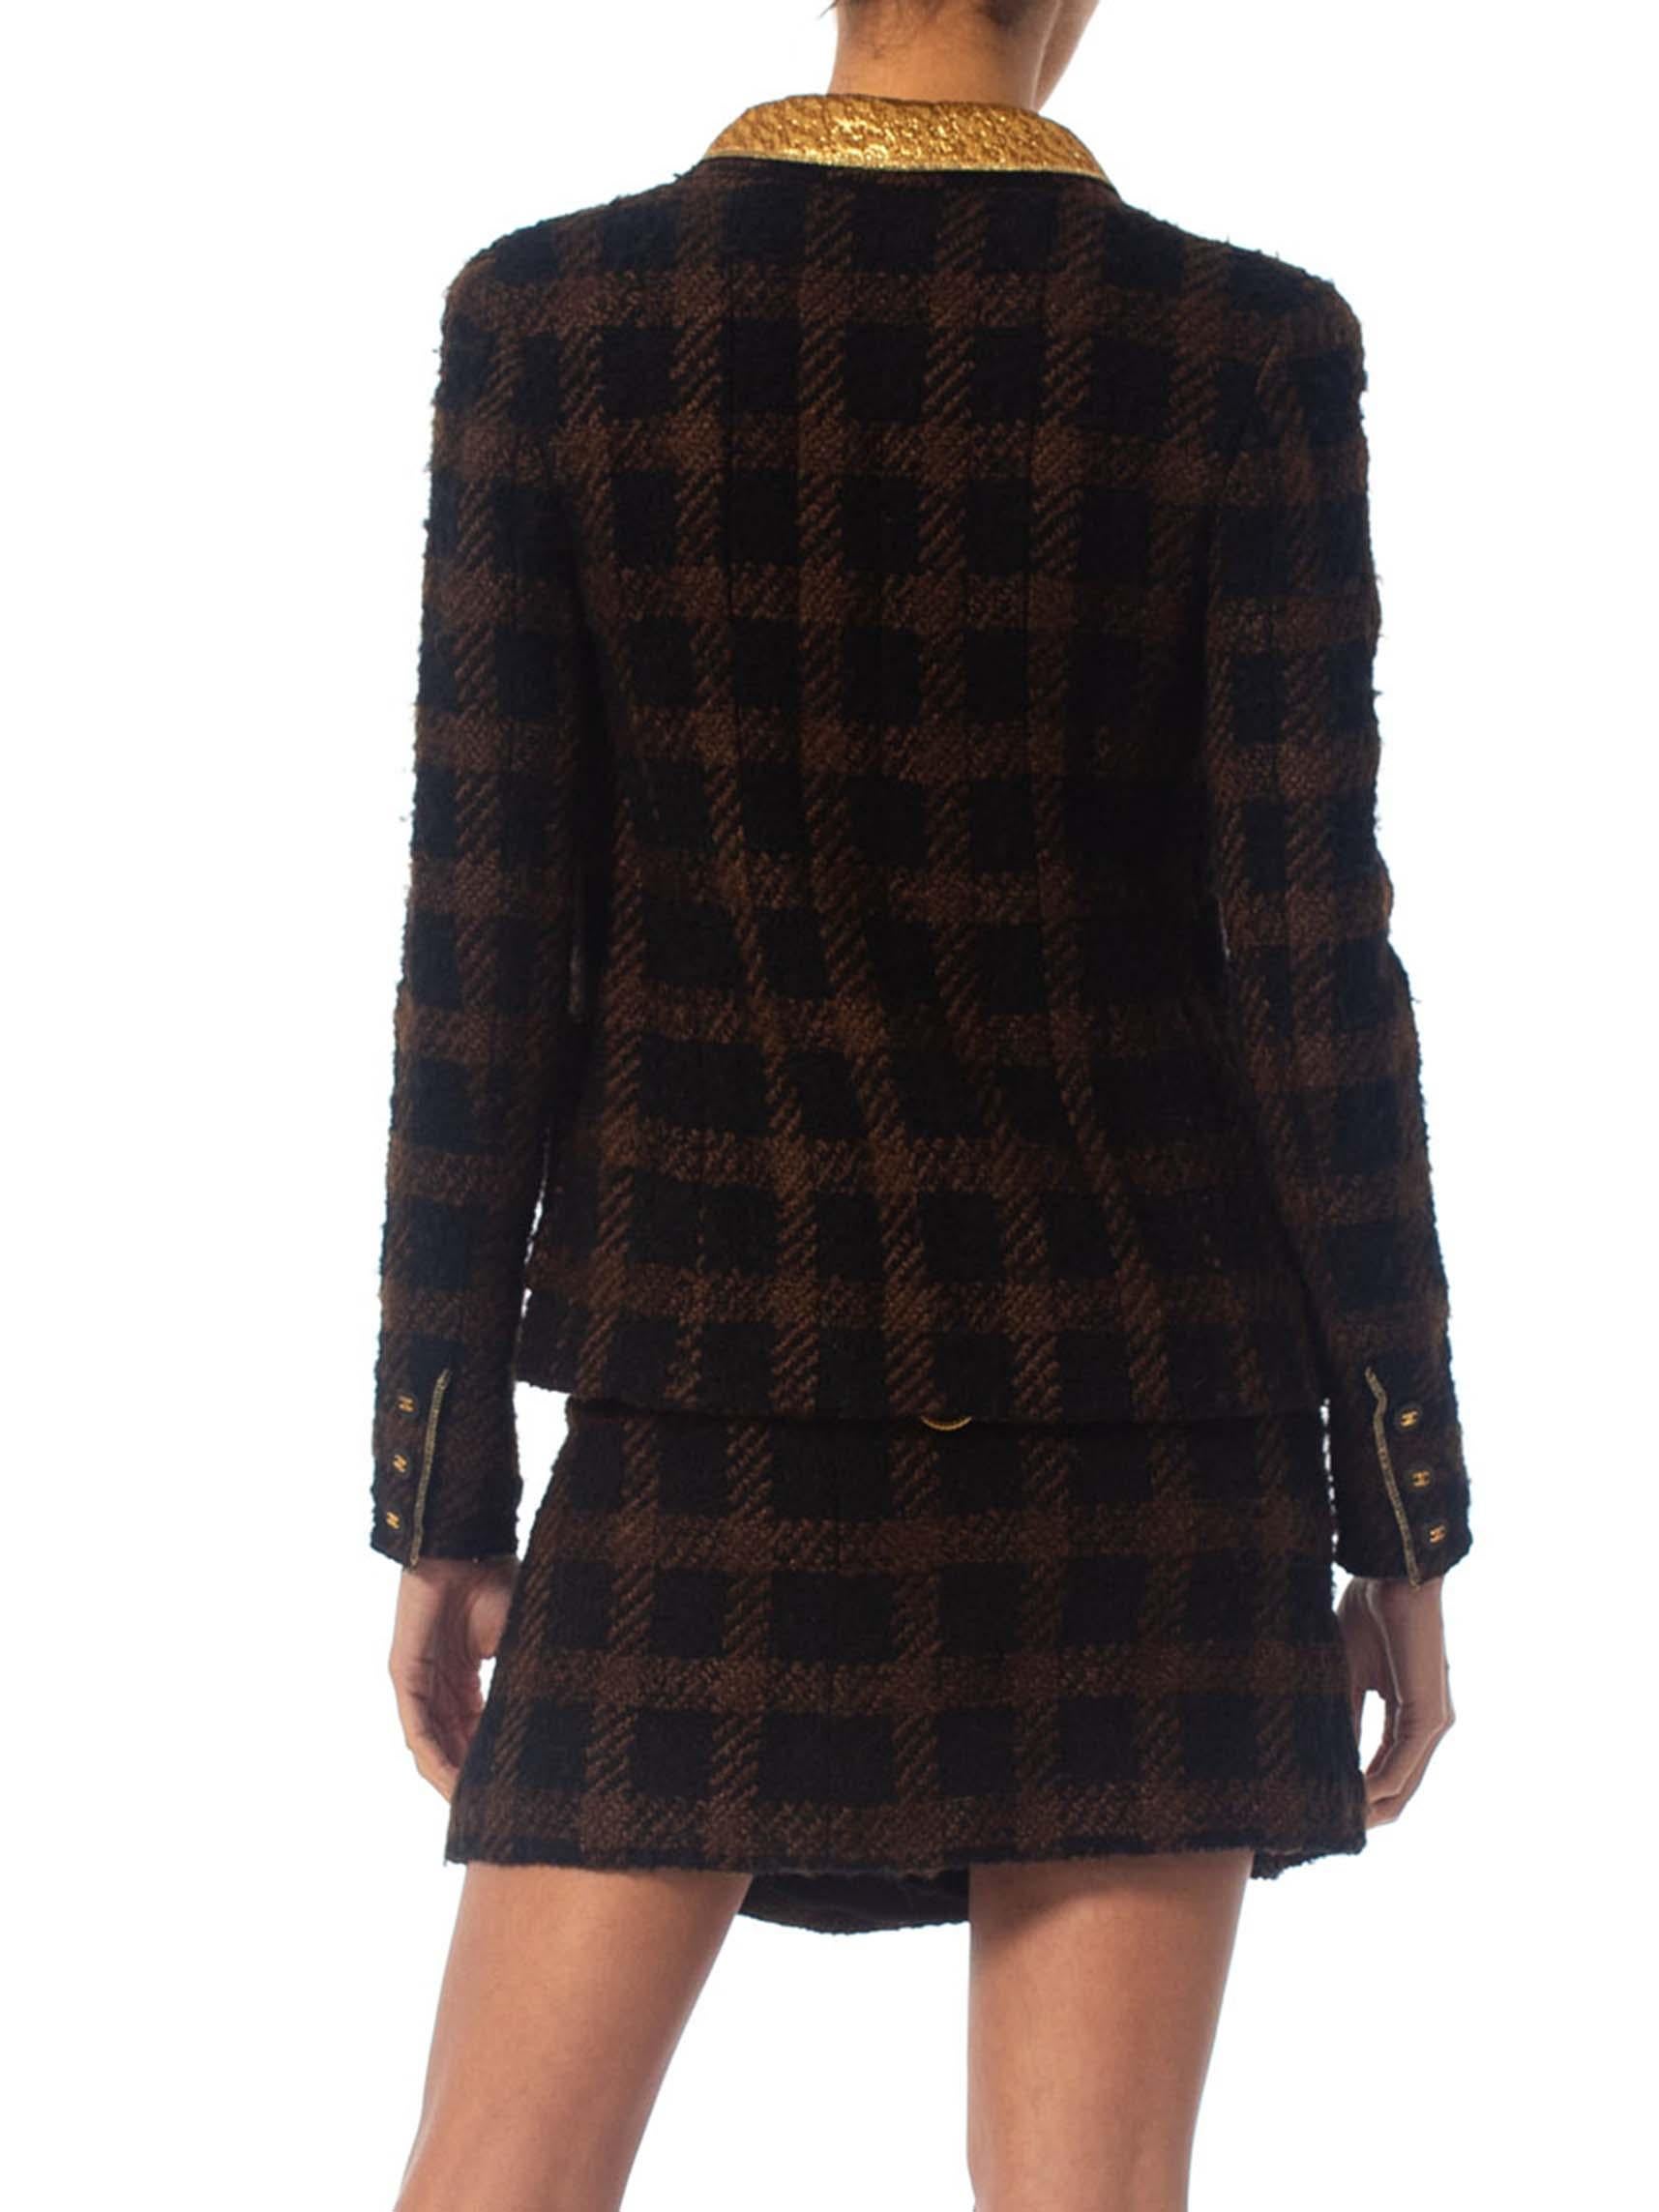 1990S CHANEL Black & Brown With  Gold Lamé Wool Mini Skirt Suit Lined In Silk For Sale 6